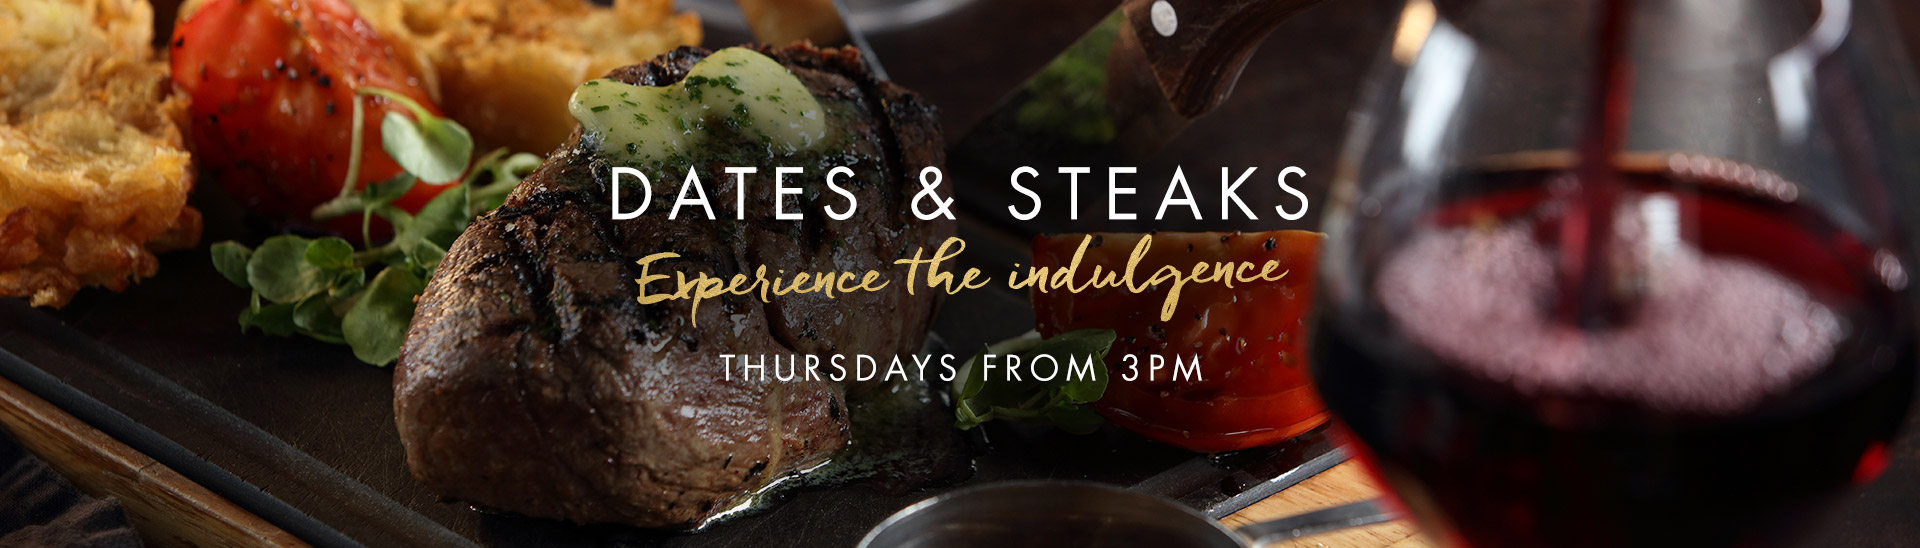 Dates & Steaks at Miller & Carter Cardiff Hayes